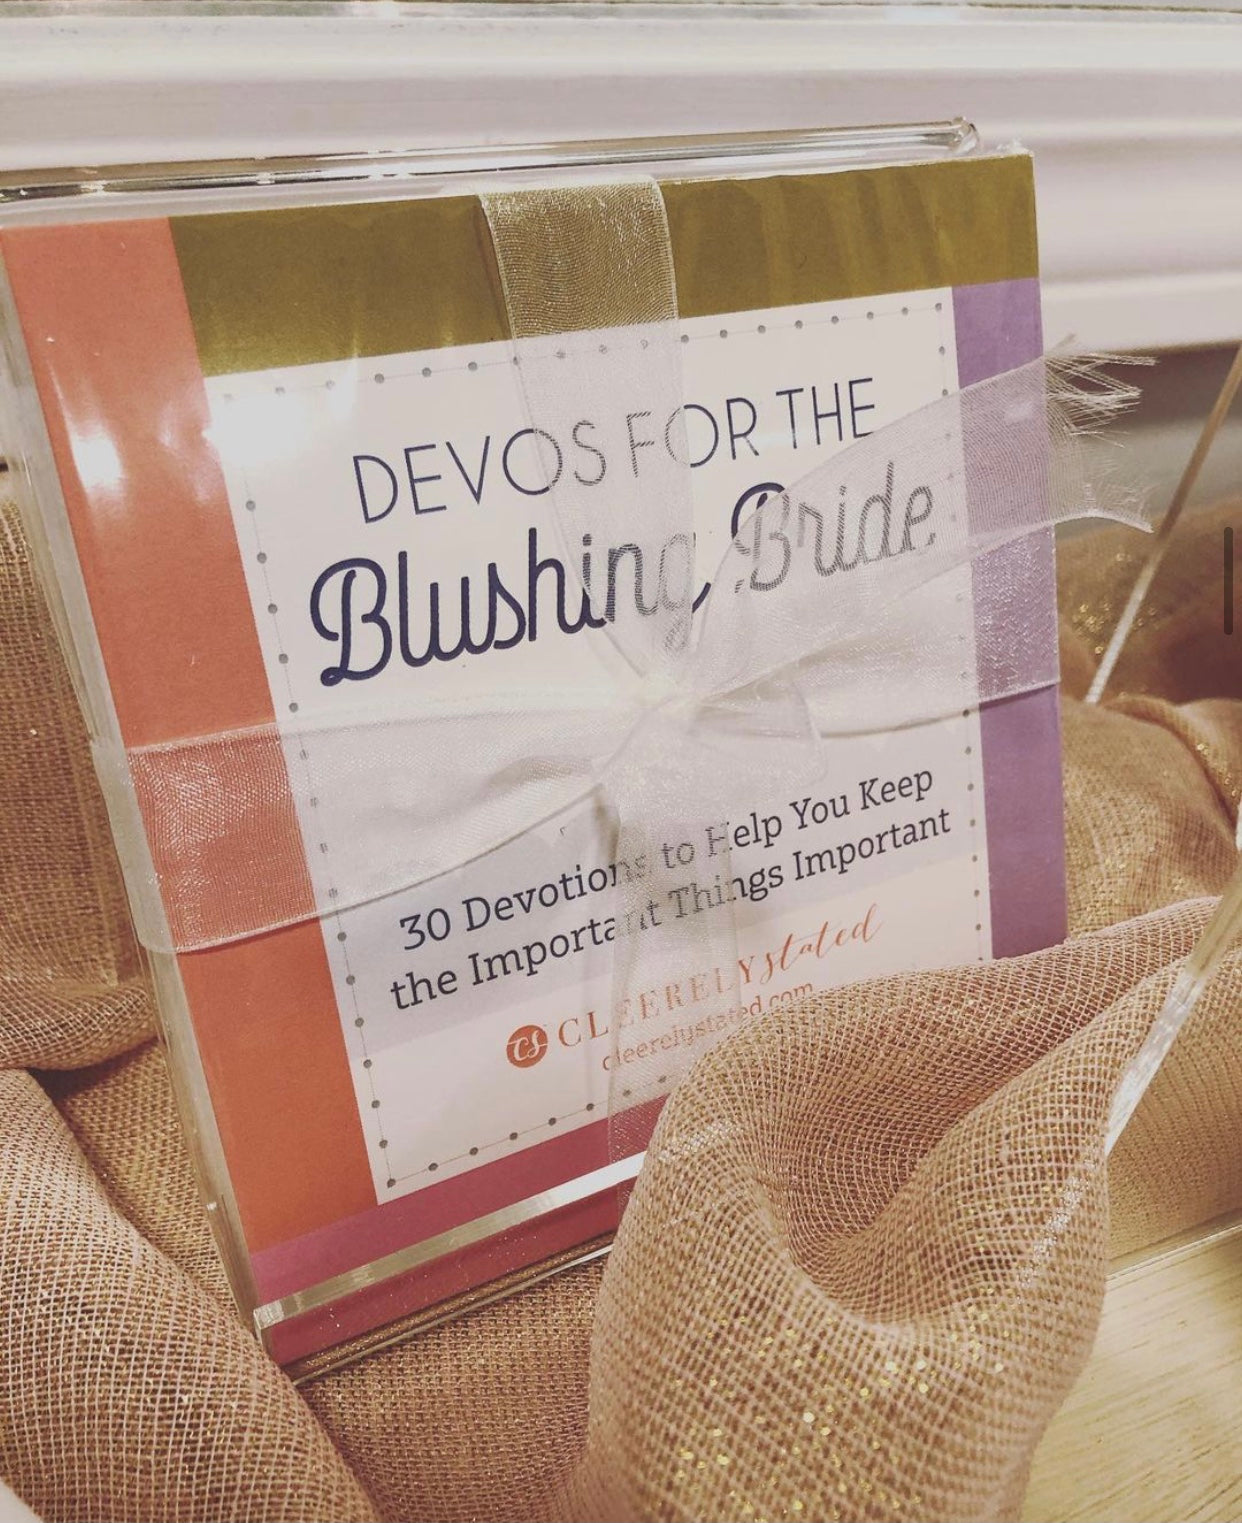 Devos For The Blushing Bride with Acrylic Stand